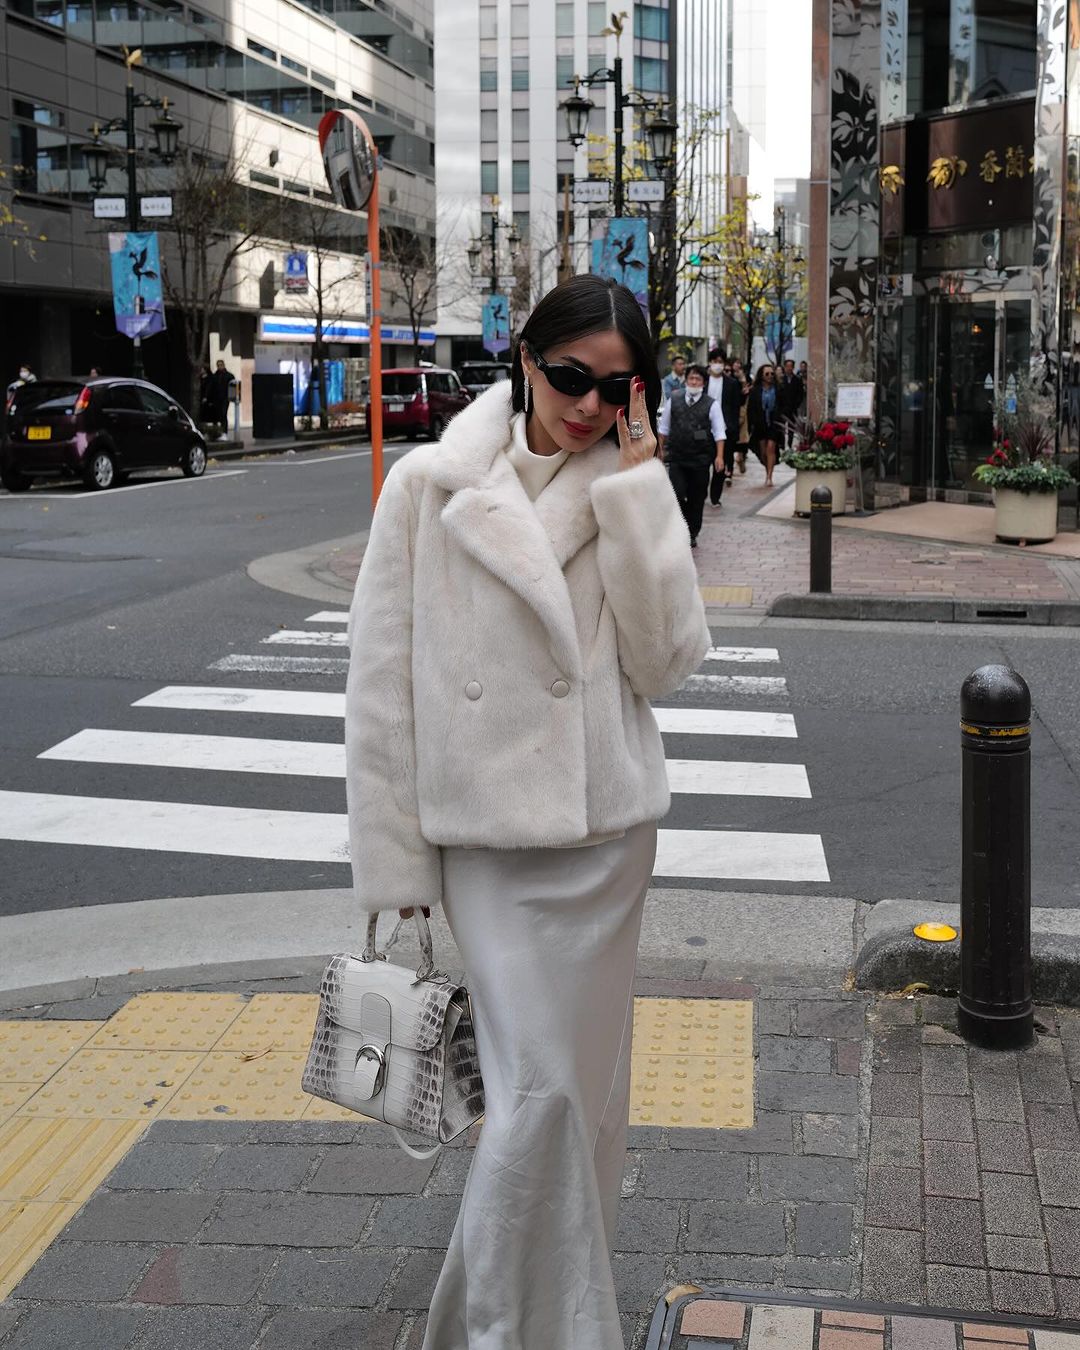 Heart Evangelista sporting all white in the streets of Tokyo